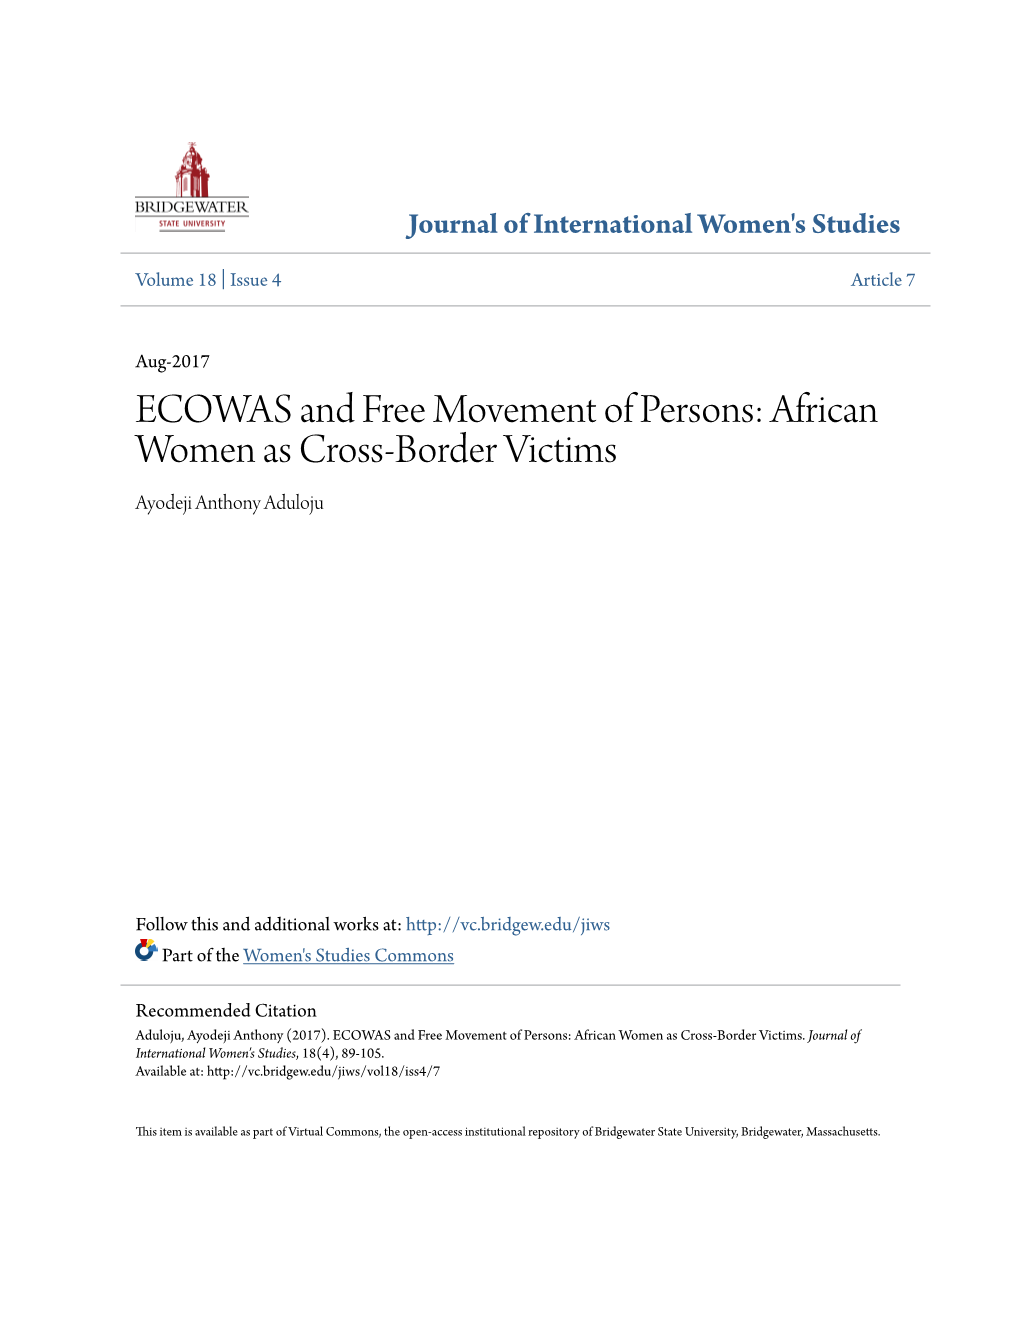 ECOWAS and Free Movement of Persons: African Women As Cross-Border Victims Ayodeji Anthony Aduloju